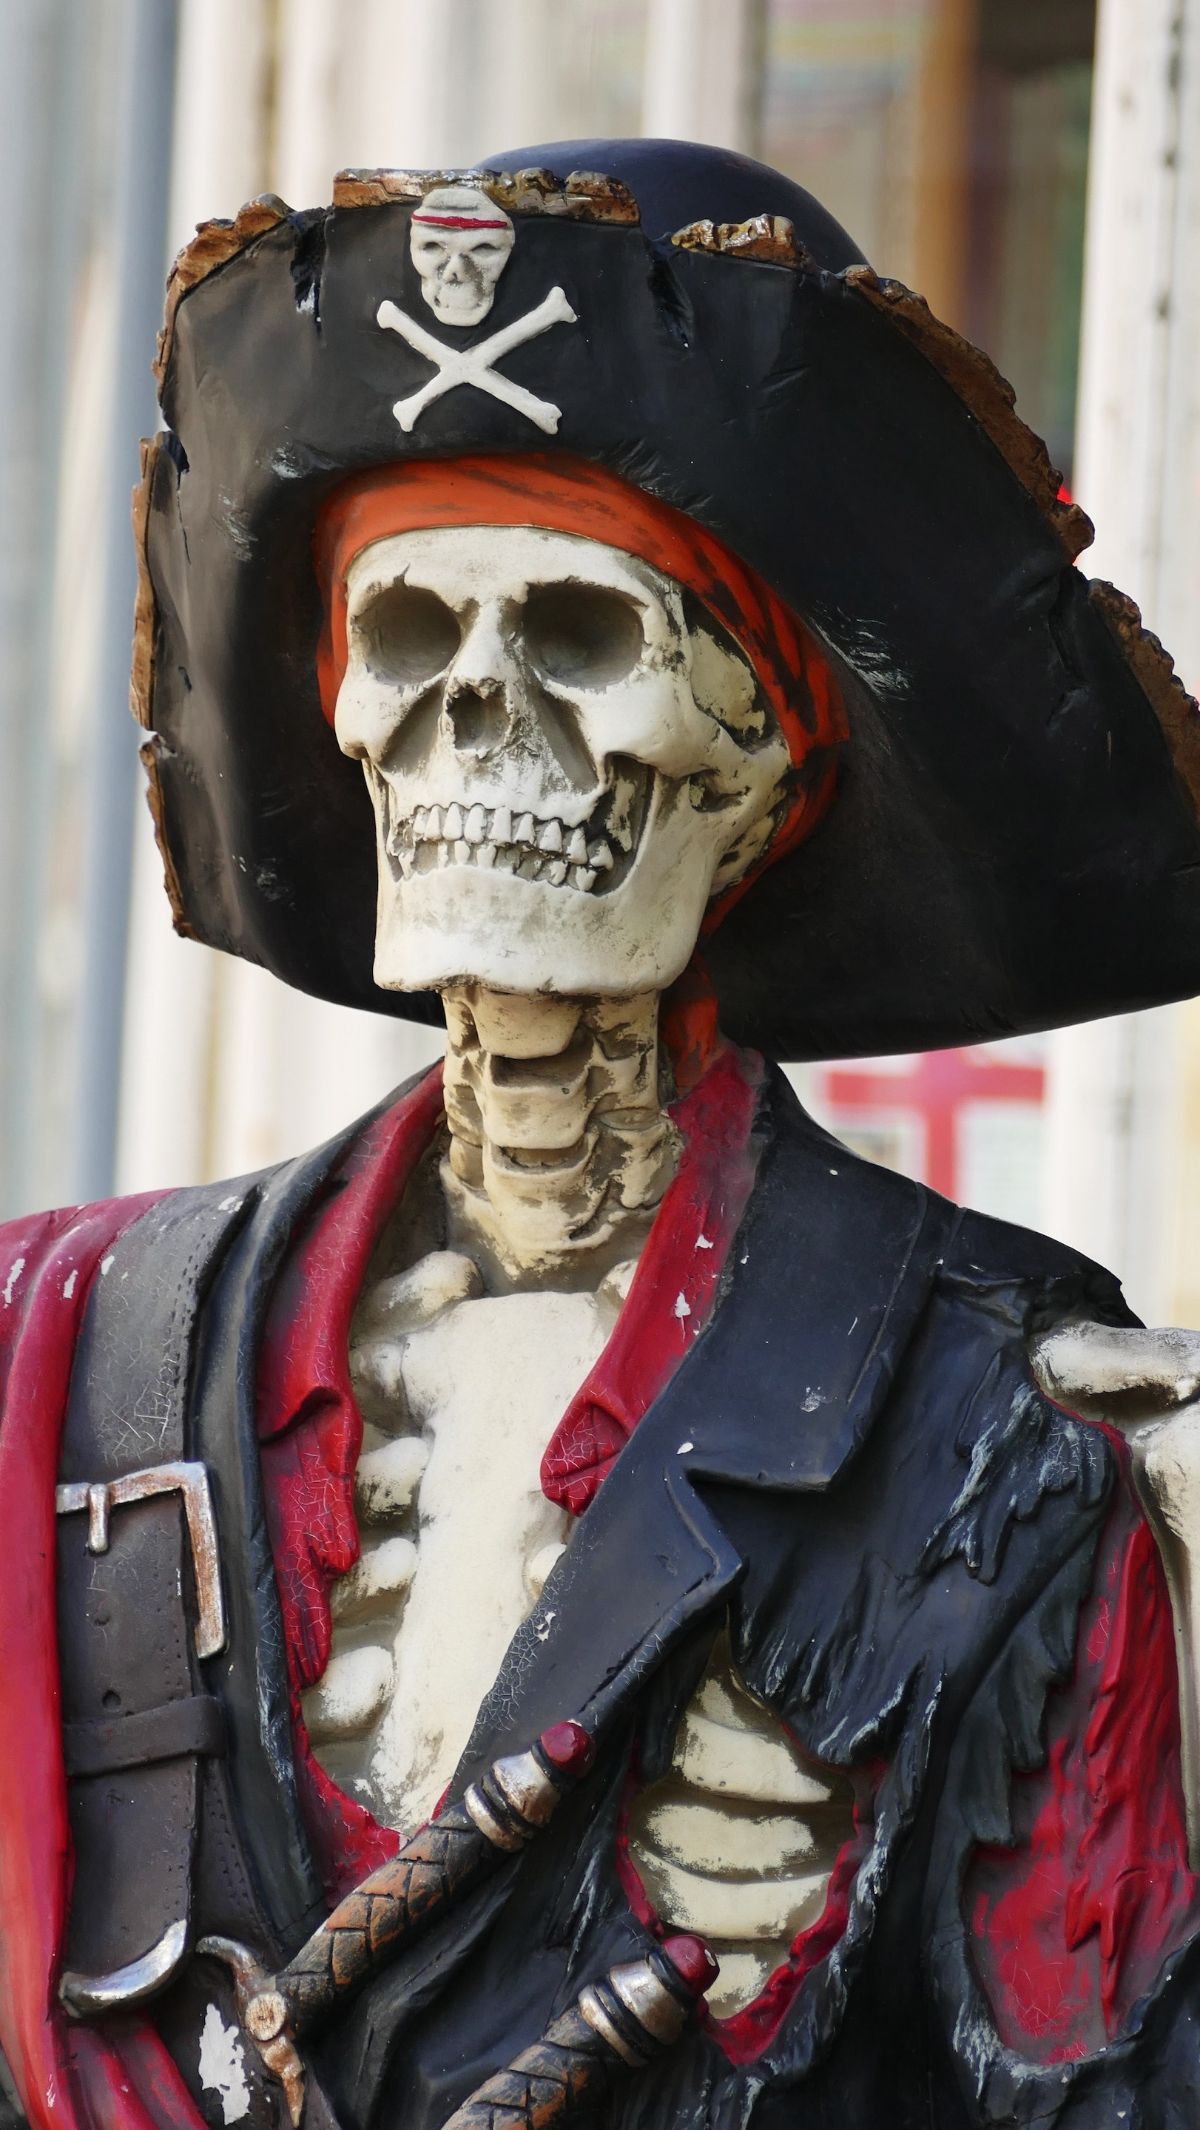 Pirate Quotes Funny to Make You Laugh<br /><br
/>1. “There is none of you but will hang me, I know, whenever you can clinch me within your power.”<br
/><br
/>2. Ahoy – This is pirate for “Hello”<br
/><br
/>3. “There is more treasure in books than in all the pirate’s loot on Treasure Island.” ― Walt Disney<br
/><br
/>4. “When a pirate grows rich enough, they make him a prince.” ― George R R Martin